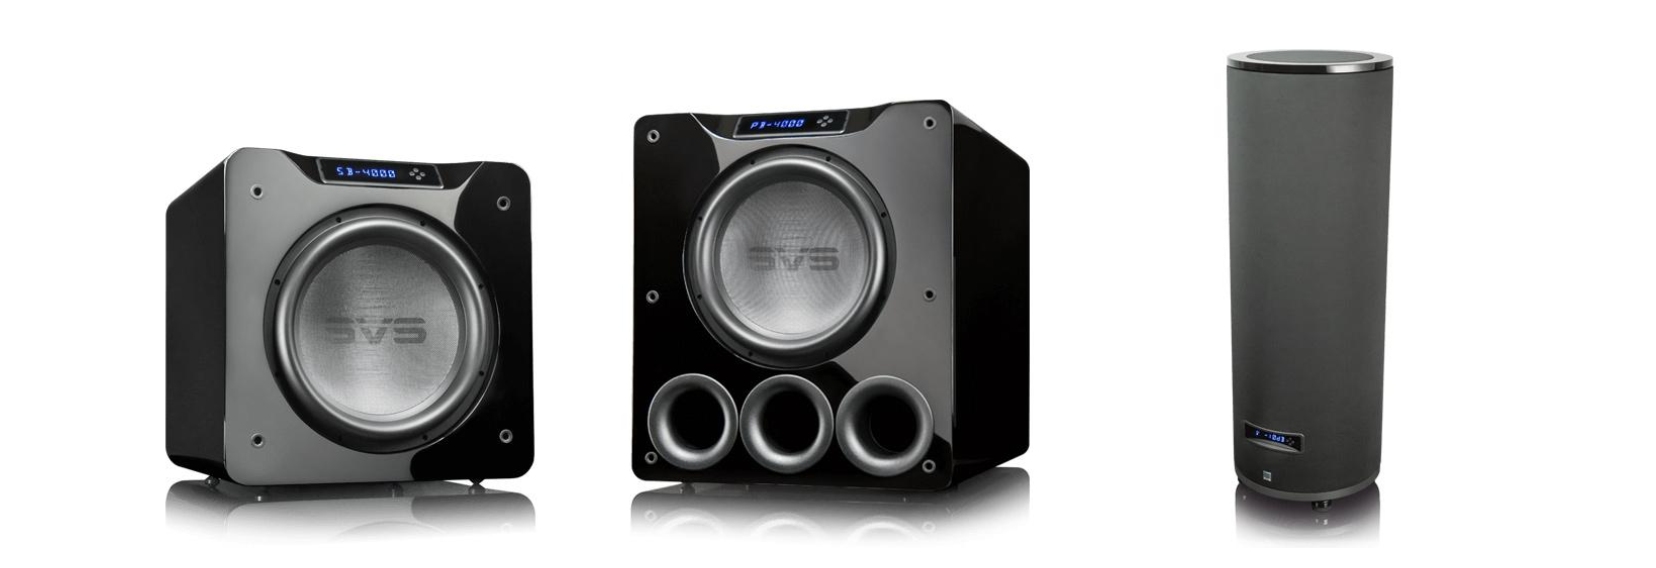 SVS 4000 Series Subwoofers